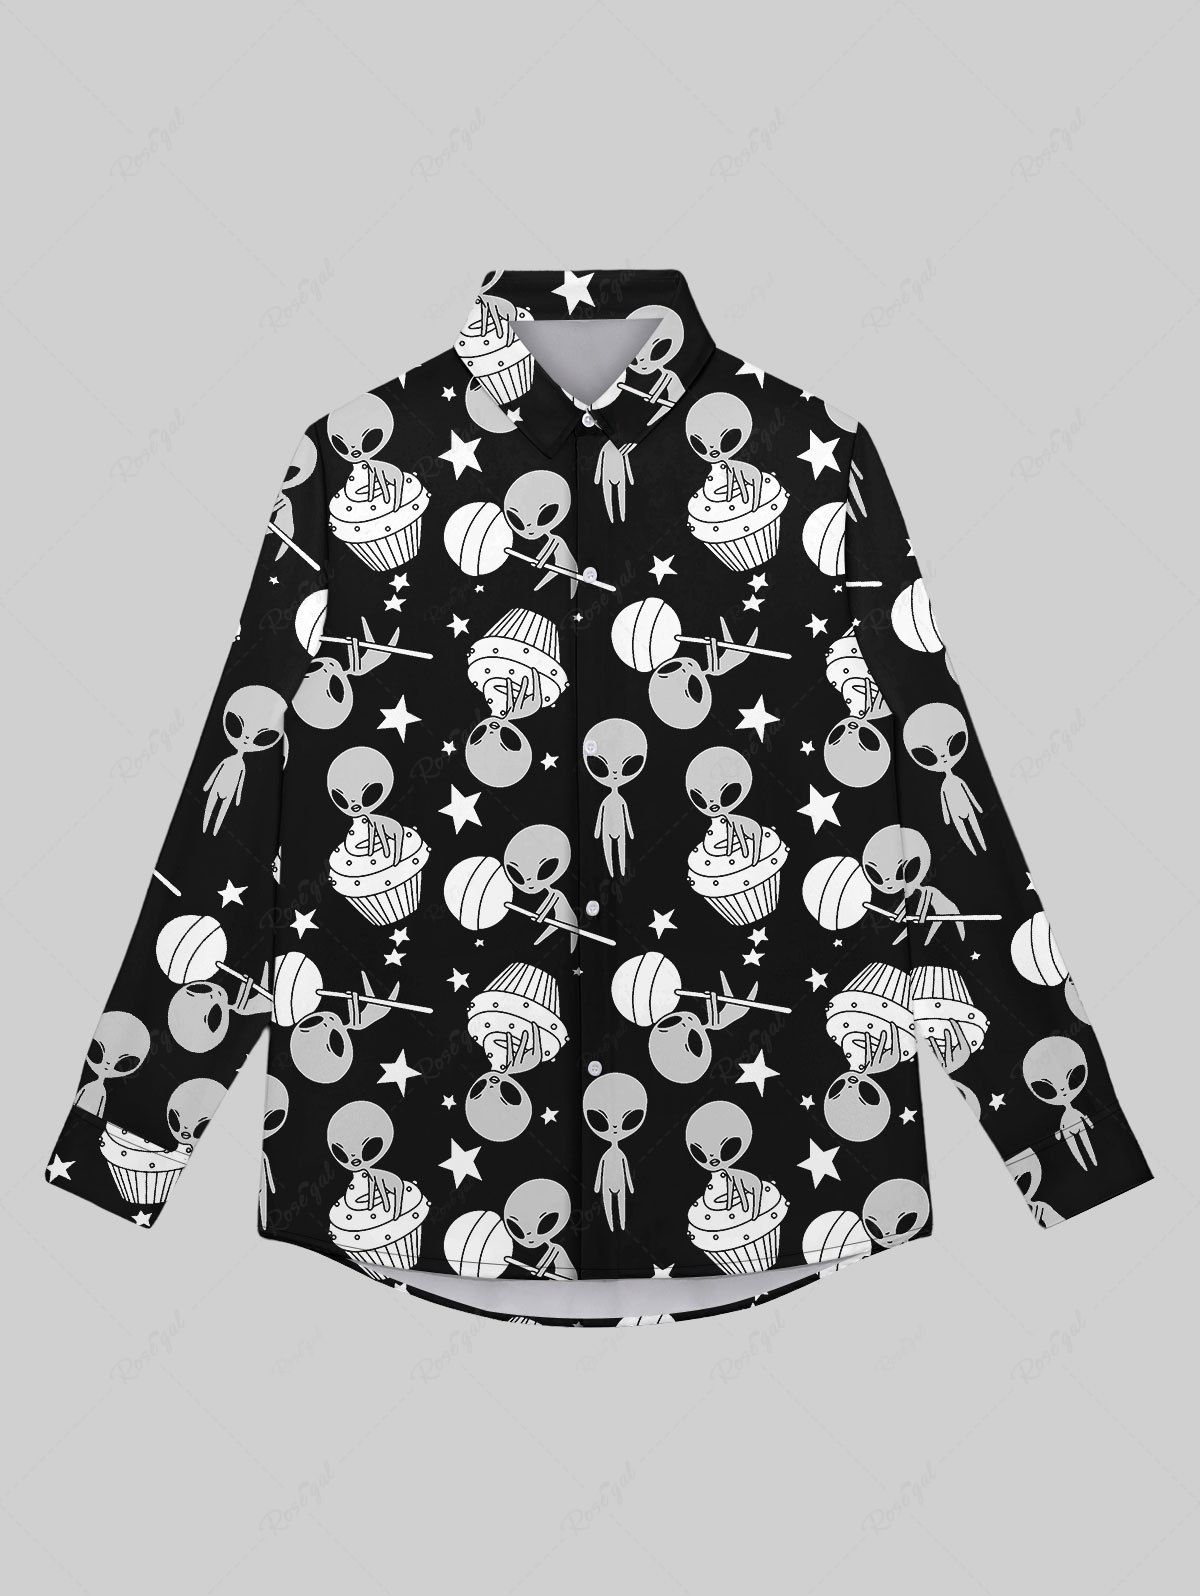 Outfit Gothic Turn-down Collar Skull Alien Candy Ice Cream Stars Print Buttons Shirt For Men  